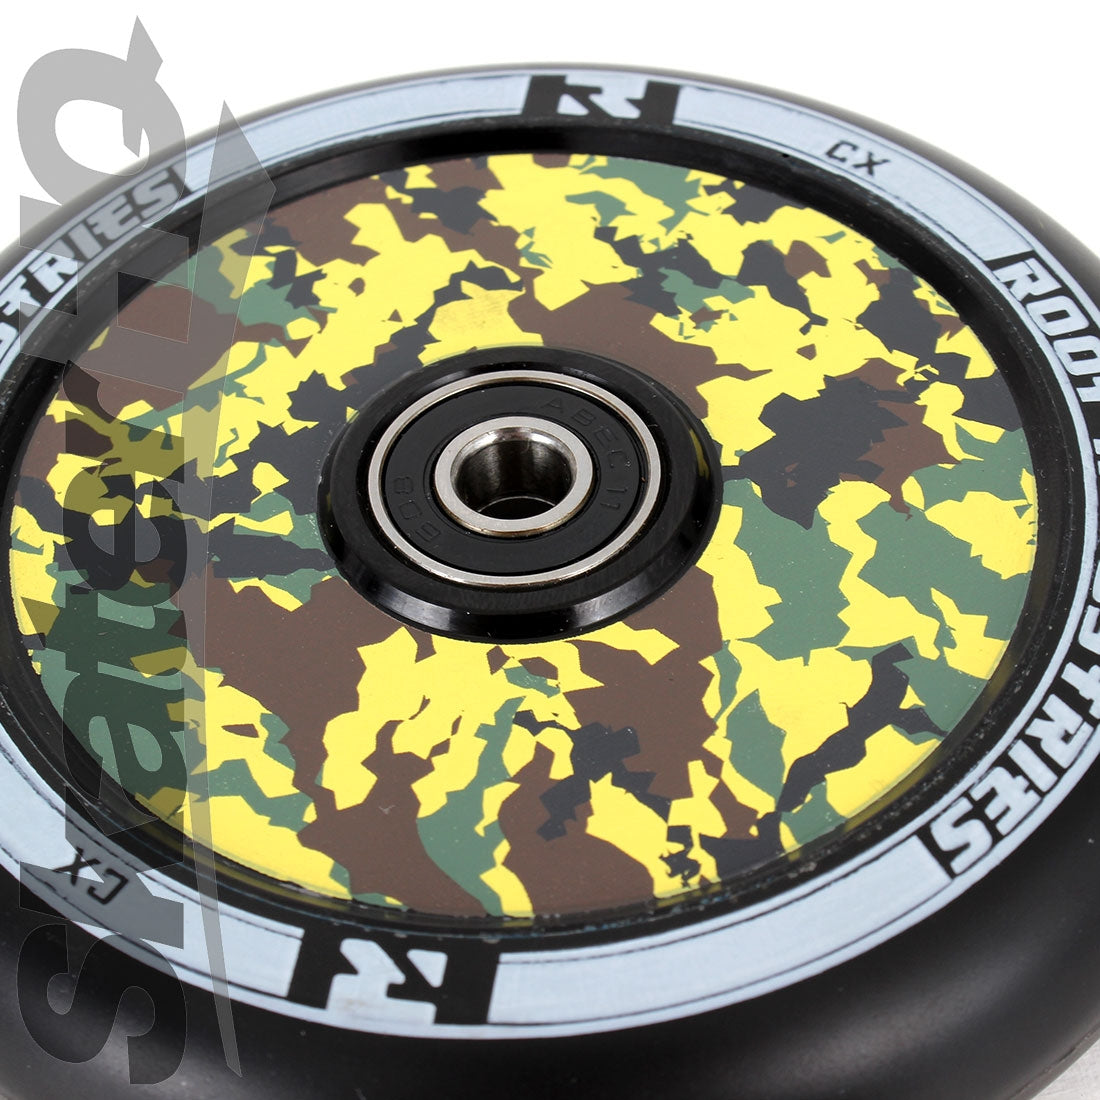 Root Industries Air 110mm - Black/Camo Scooter Wheels